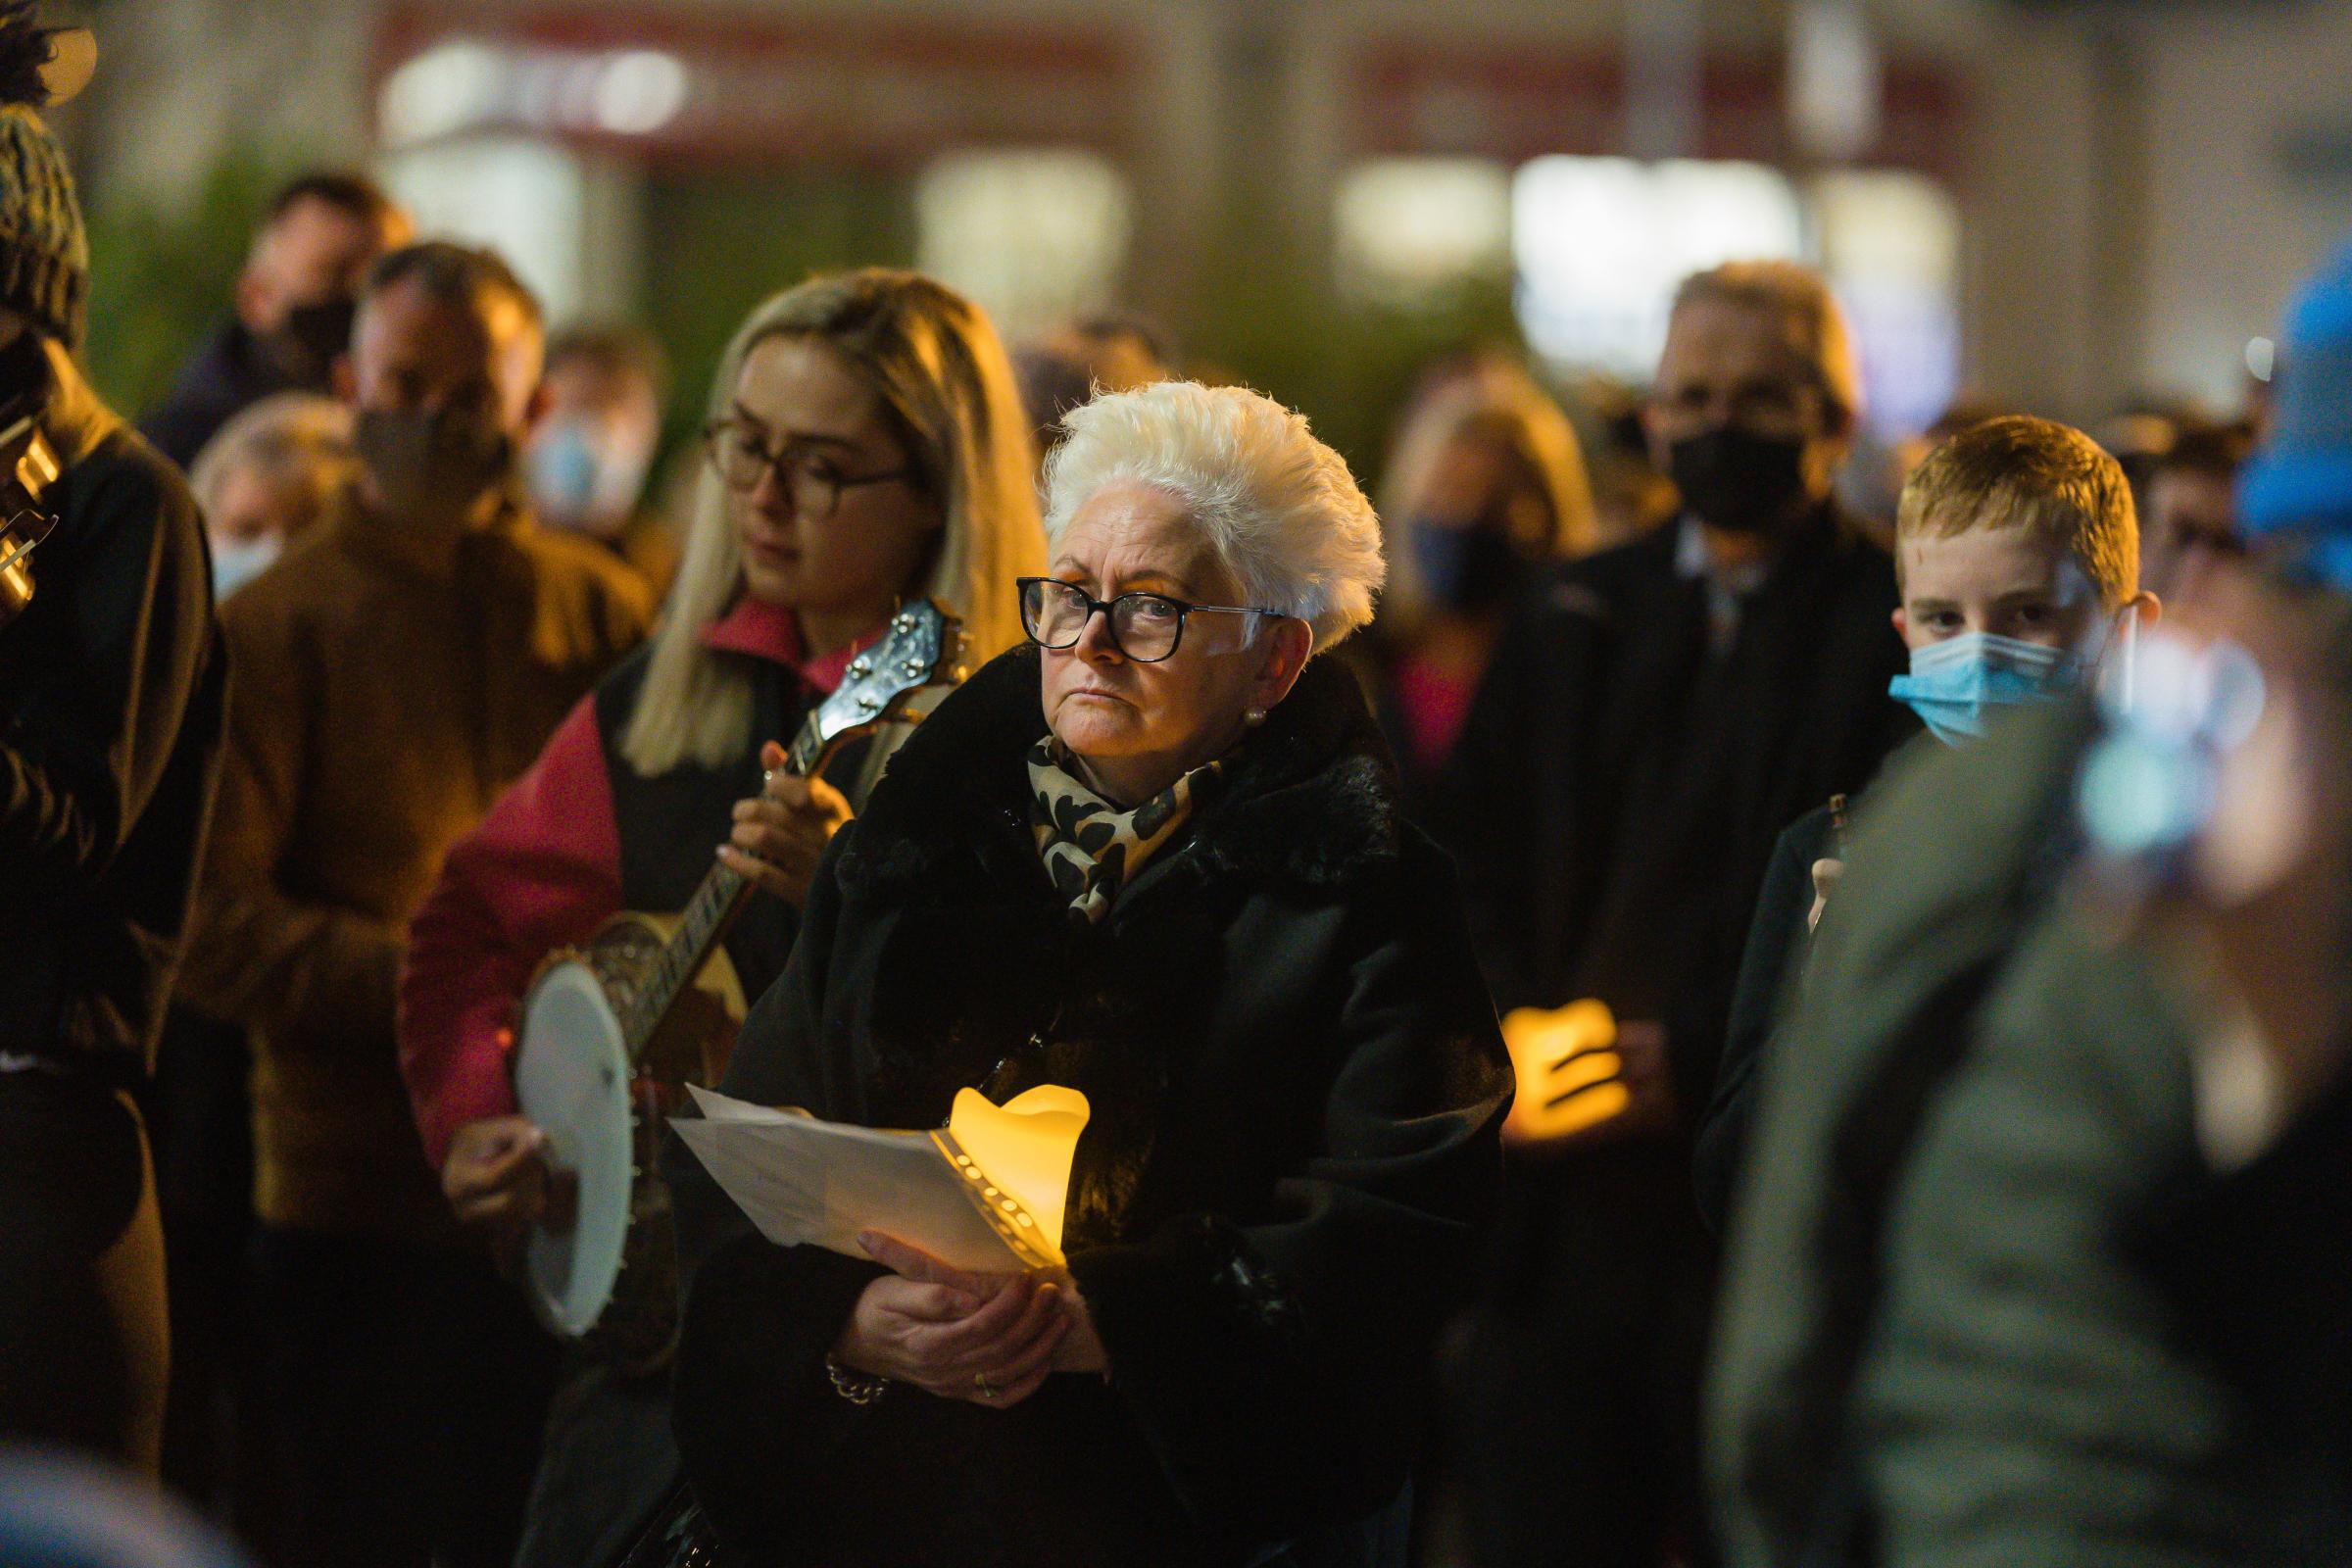 There was a large gathering at Fermanagh House, Enniskillen on Friday 14th January for a candlelit vigil to remember Ashling Murphy. Finola Owens of Tradacad, who was one of the organisers, spoke at the vigil. Picture: Ronan McGrade